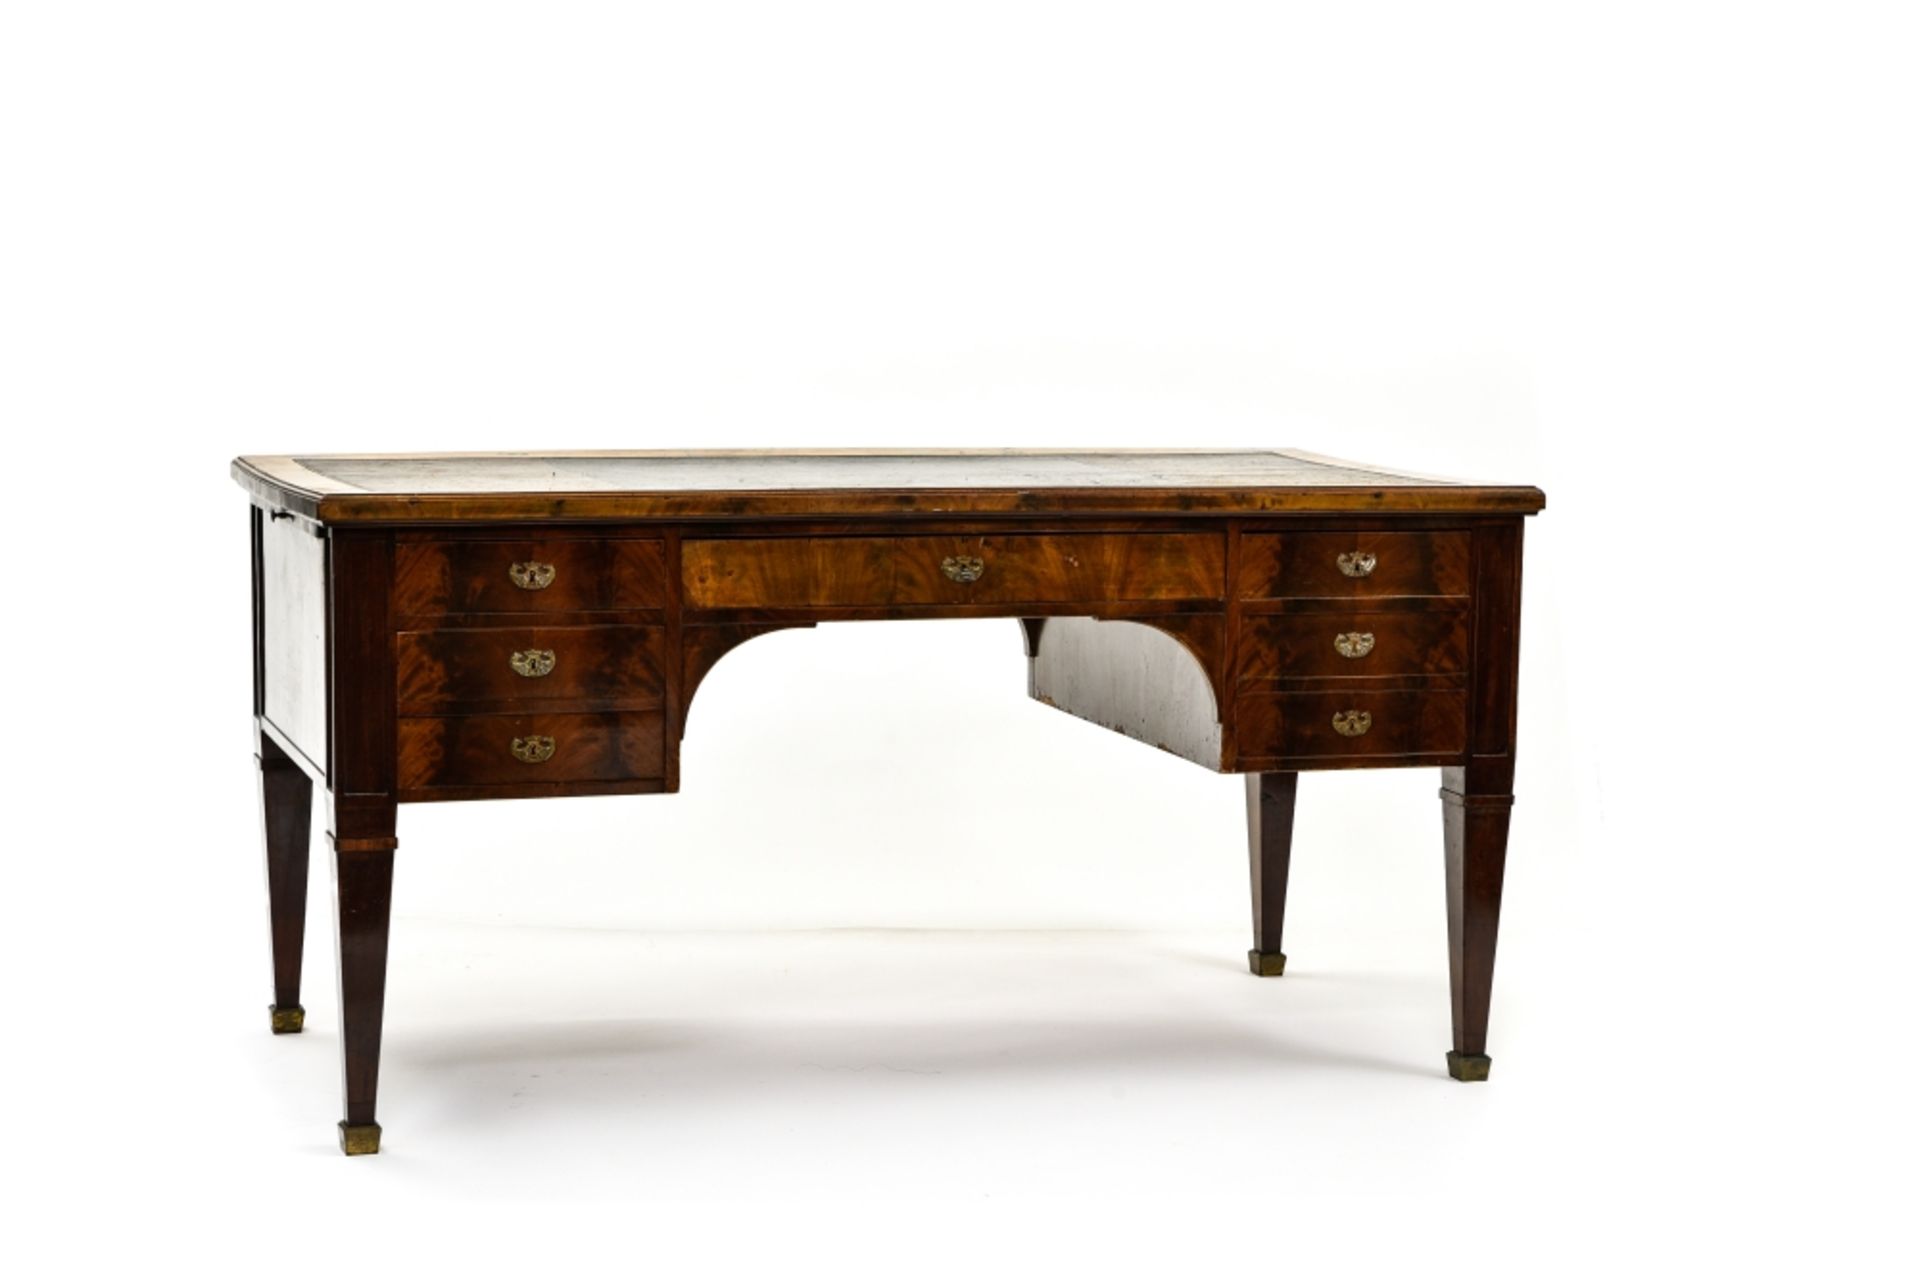 Large empire desk 19TH CENTURY WORK mahogany, with six drawers (one hidden) and brown and gilt